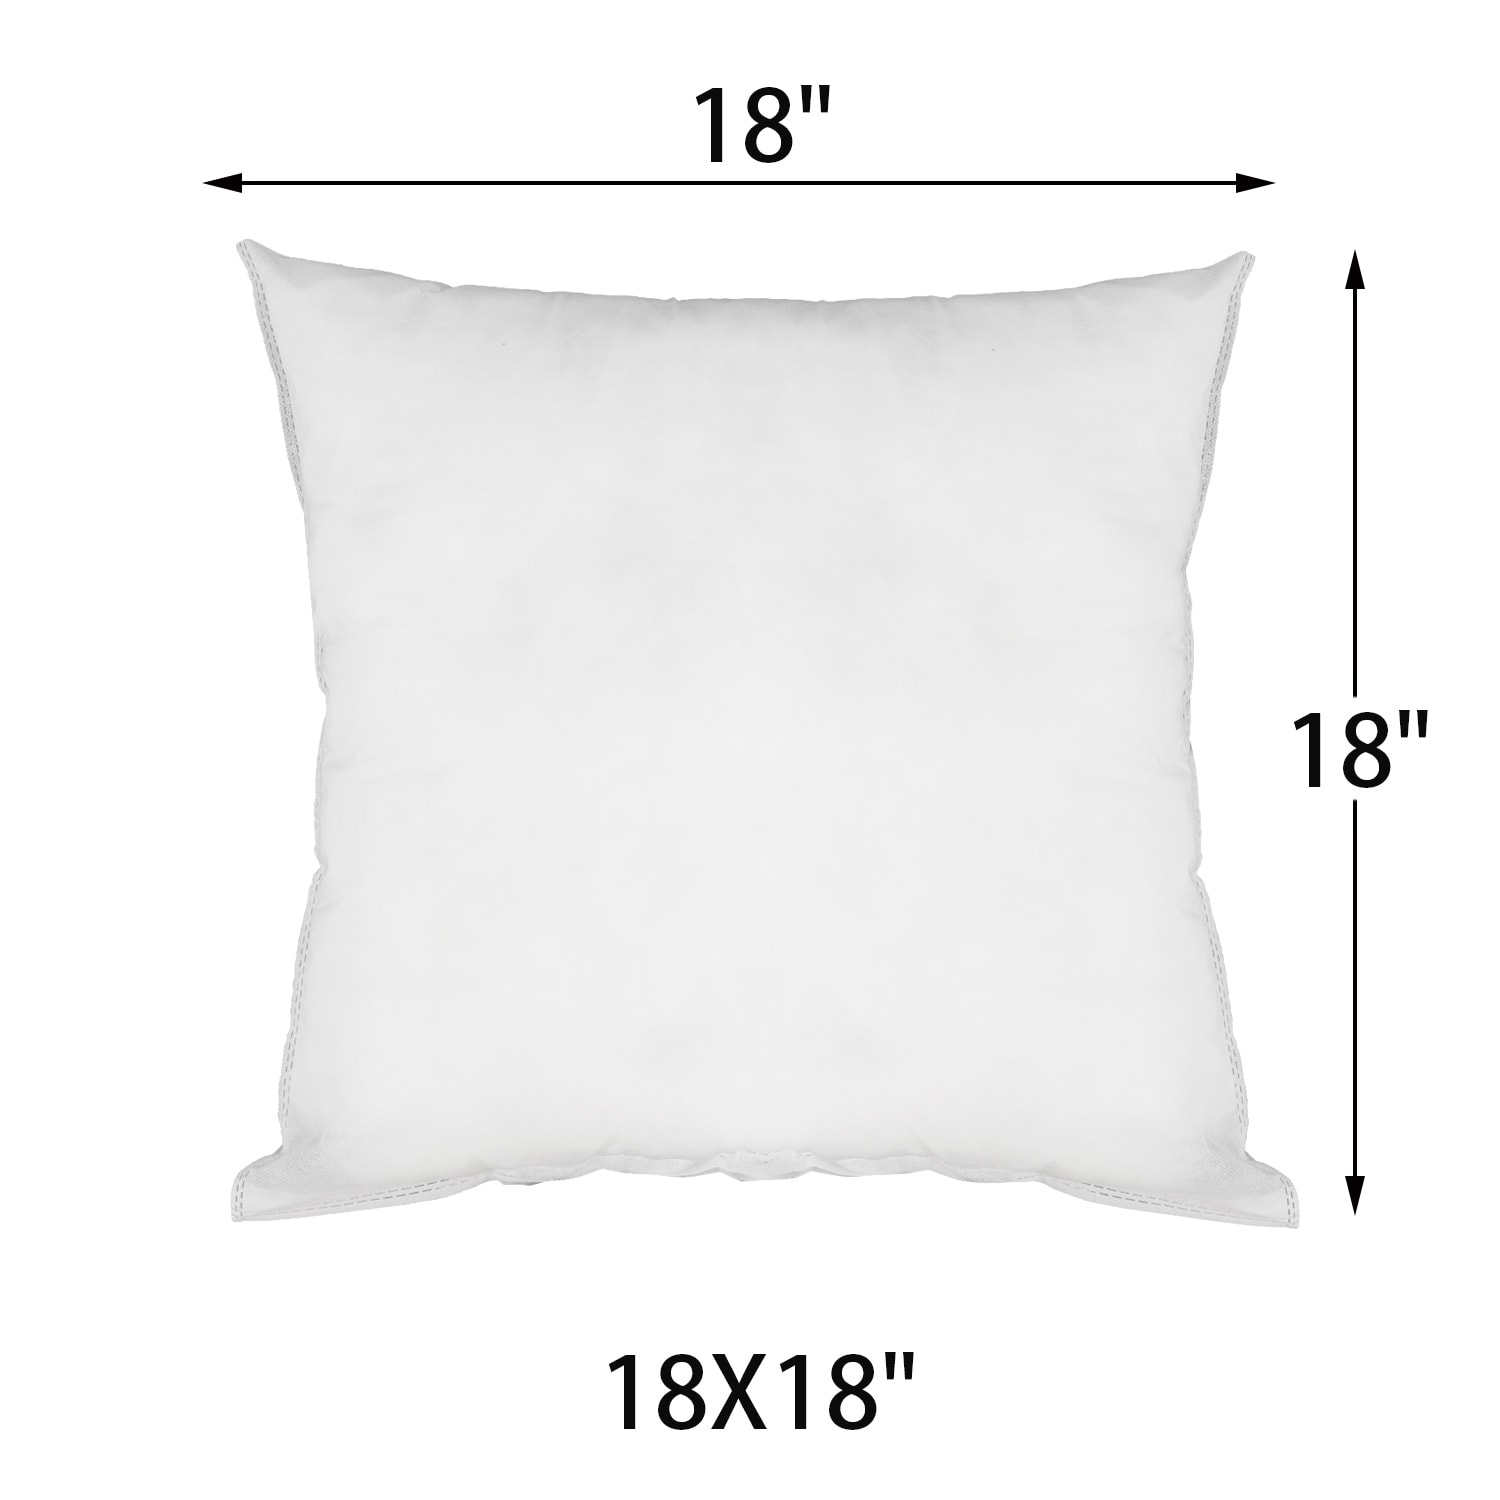 https://ak1.ostkcdn.com/images/products/is/images/direct/0ea35d2b99ca5988b5a7dac2777110f5e17dbafa/Adeco-Throw-Pillow-Inserts-Square-18x18-Inches.jpg